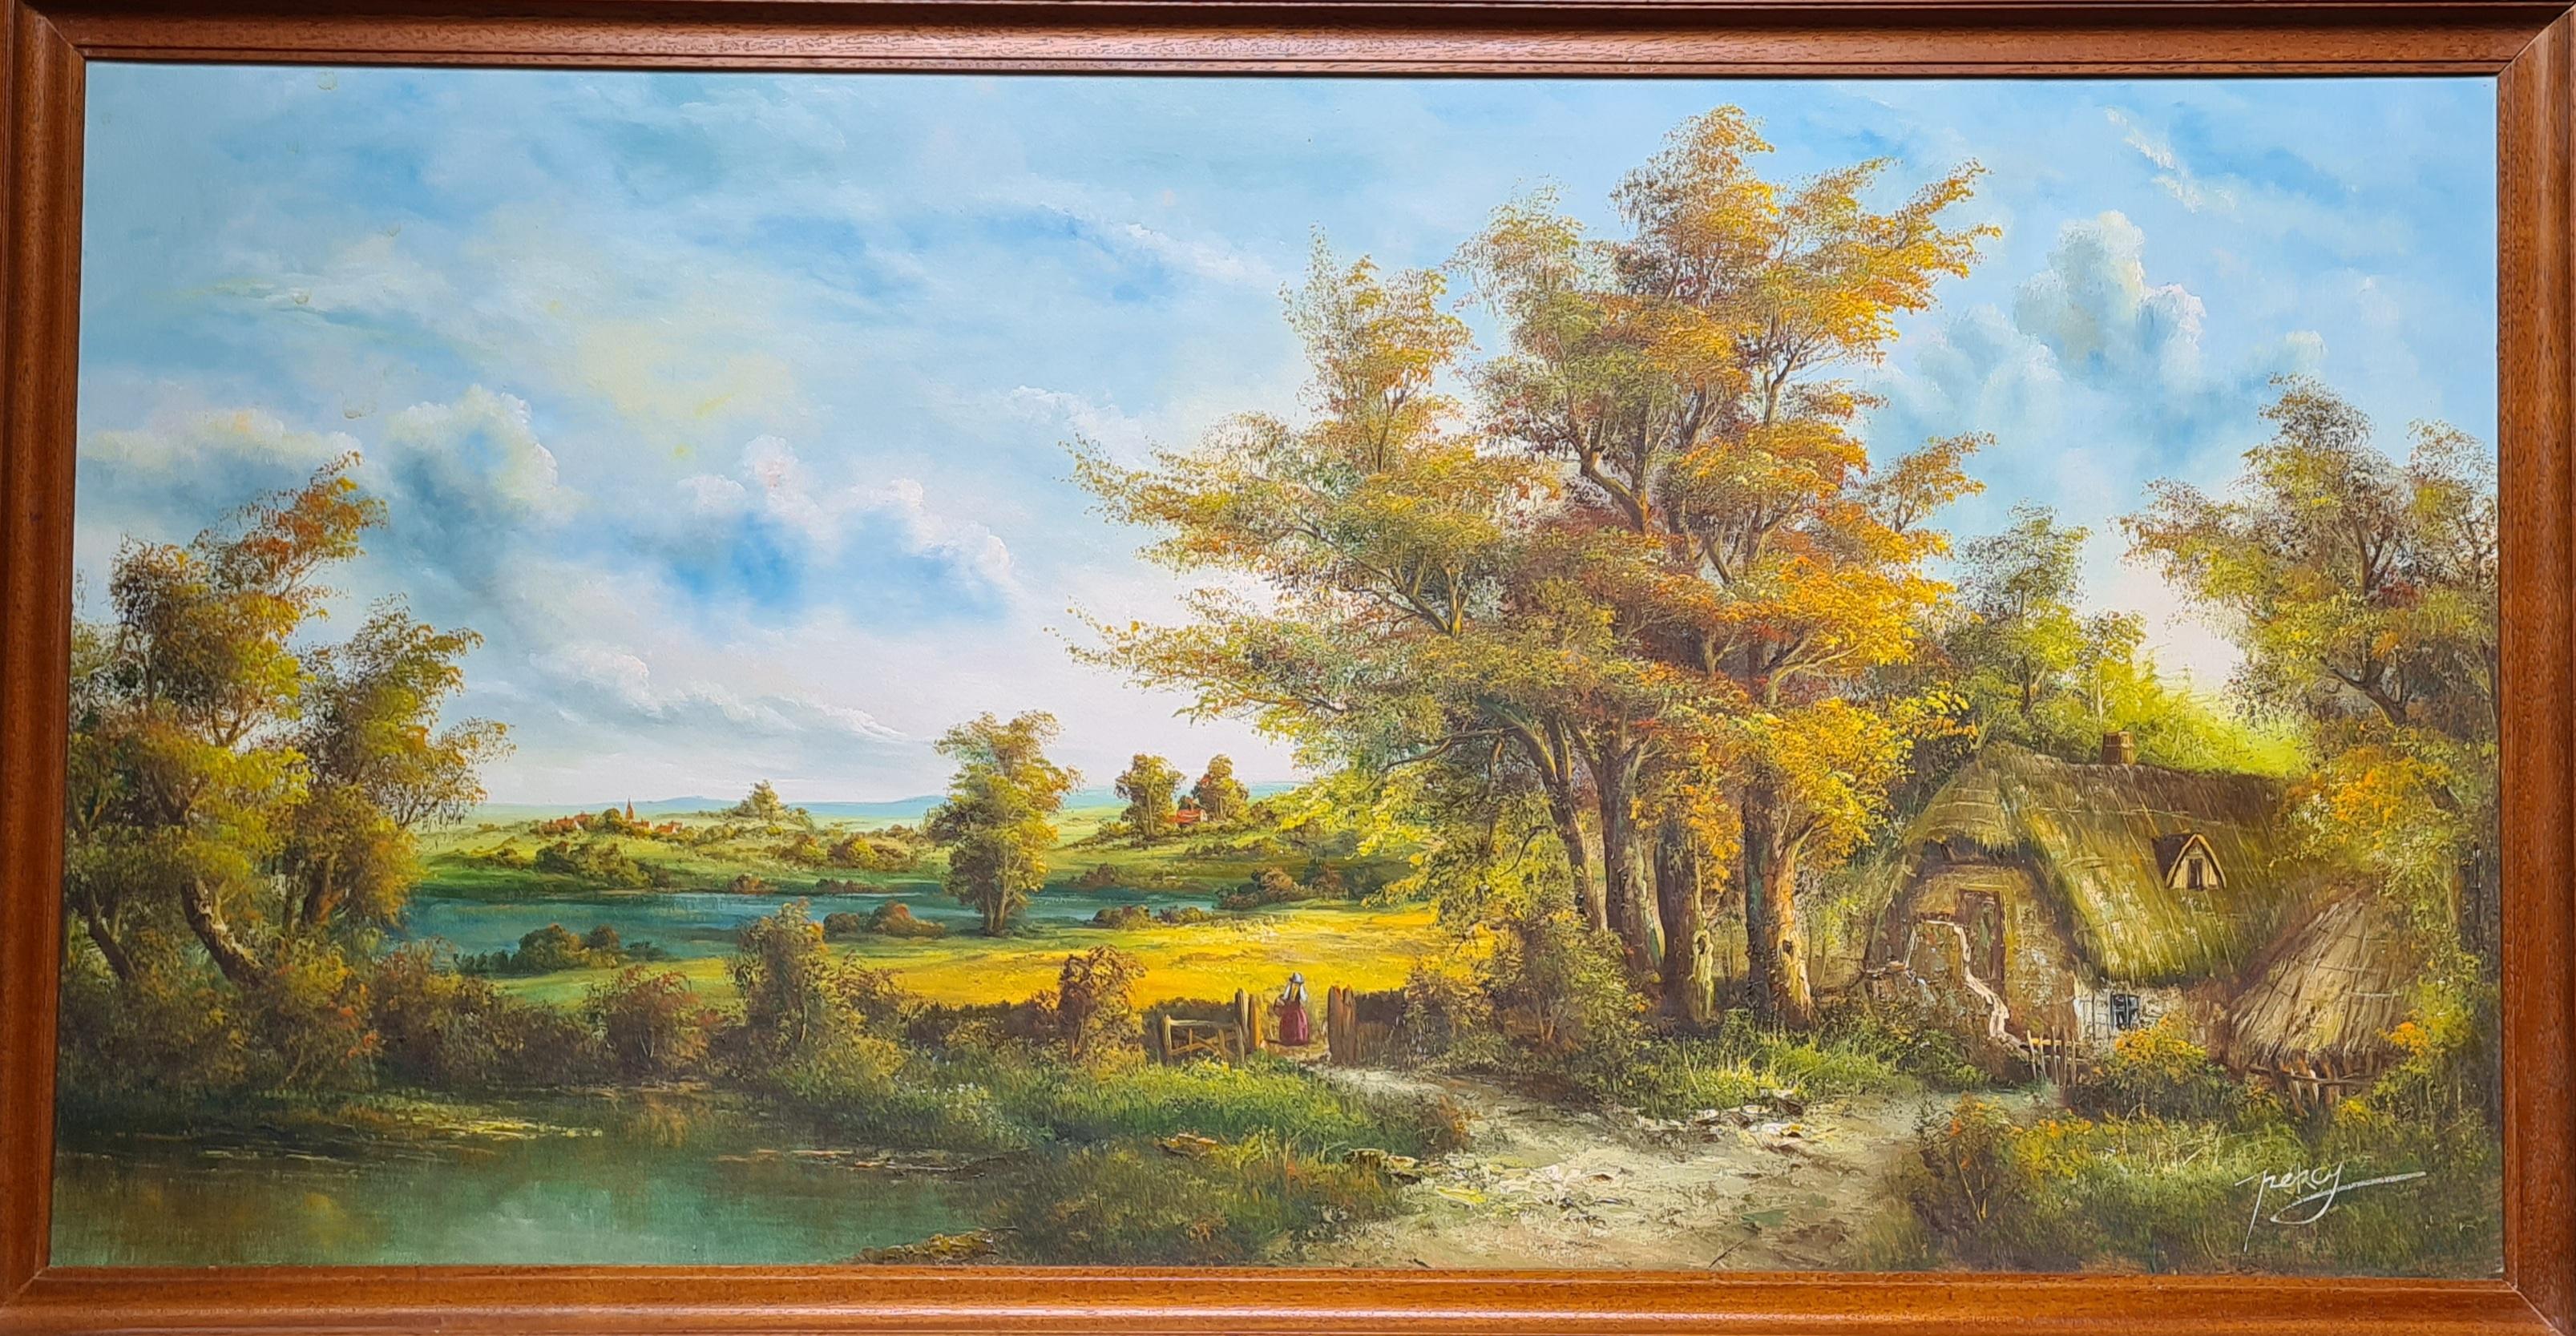 Percy Landscape Painting - The Cottage, A Rural Idyll, Large Scale French Country Landscape. Oil on Canvas.